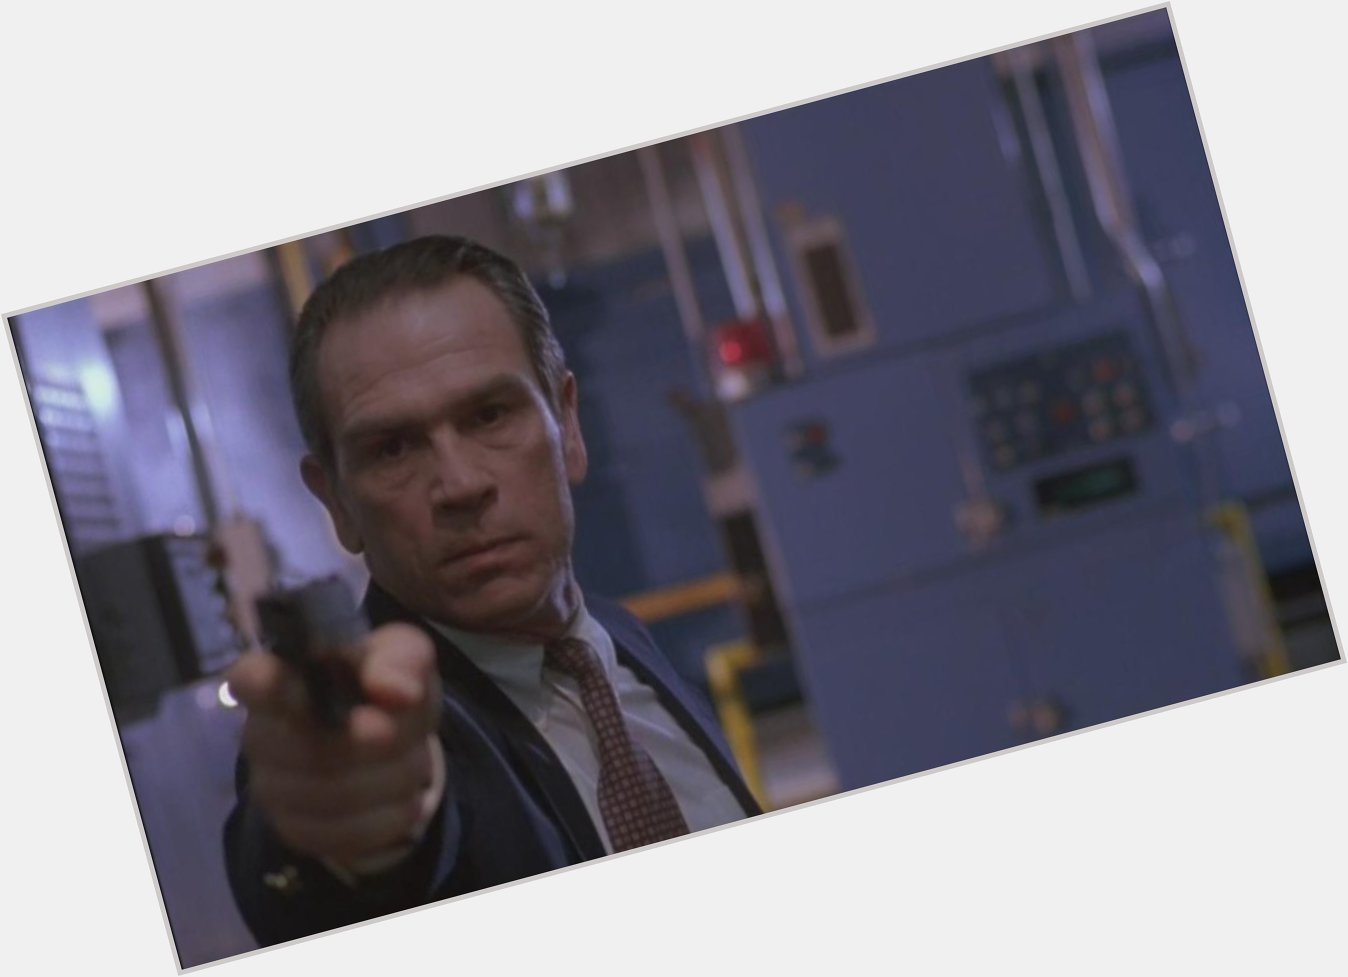 Happy 75th birthday Tommy Lee Jones!

Which is your favorite performance by this amazing actor? 